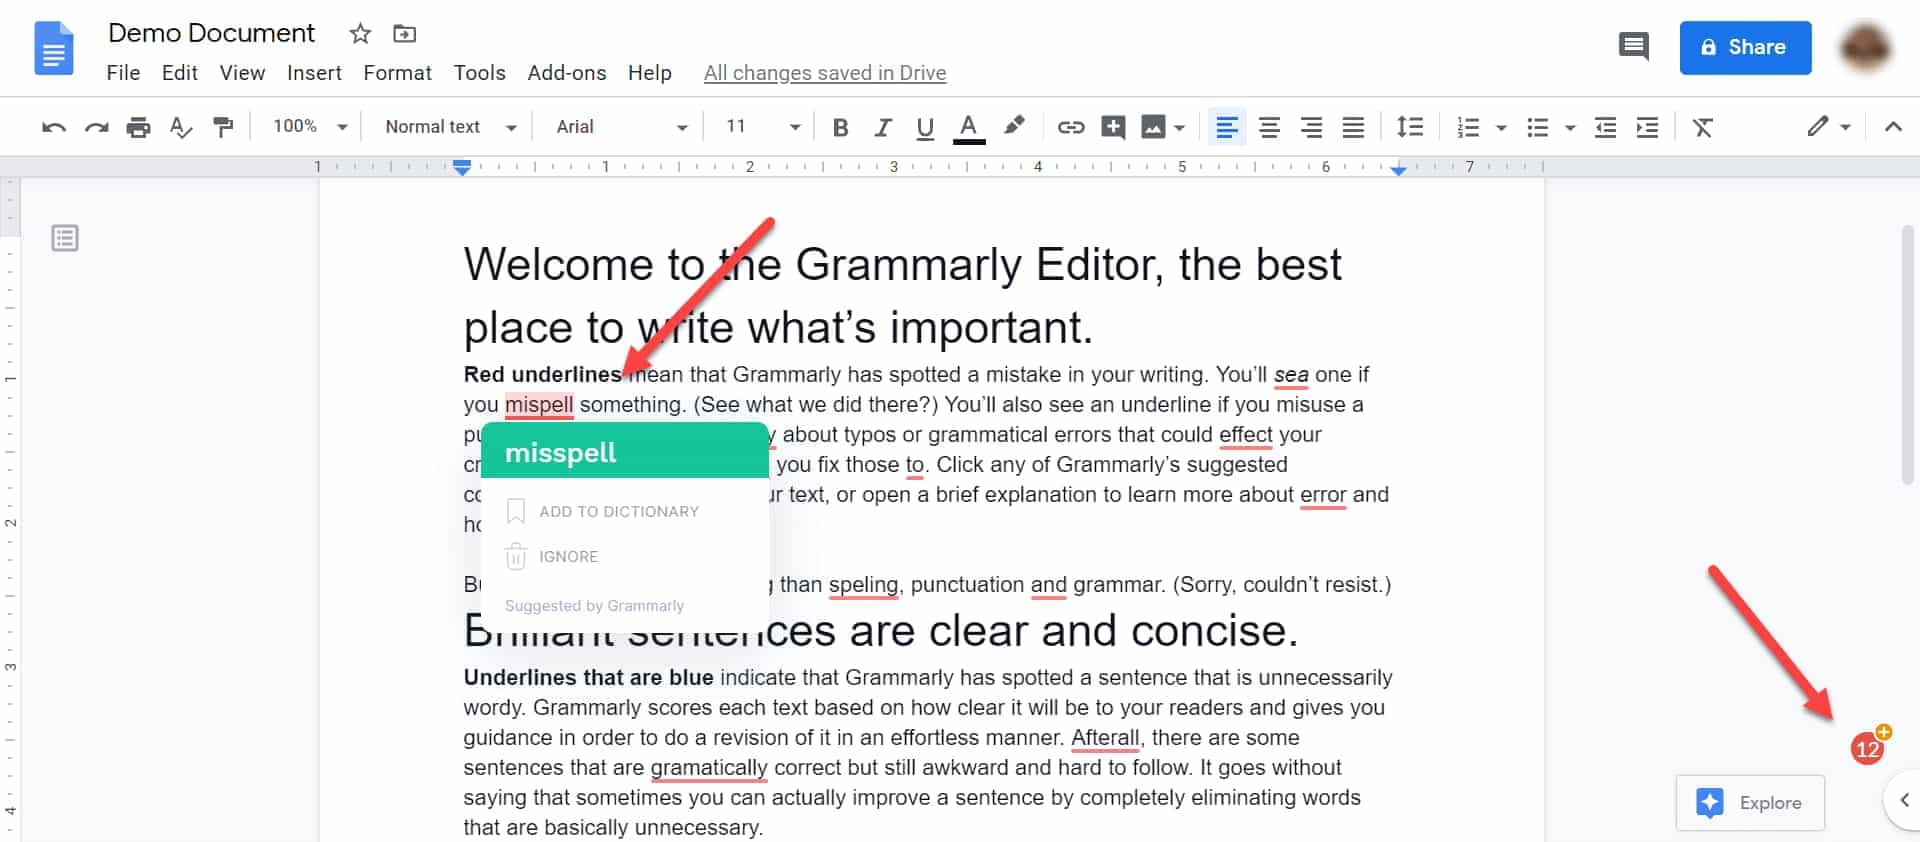 edit document with grammarly